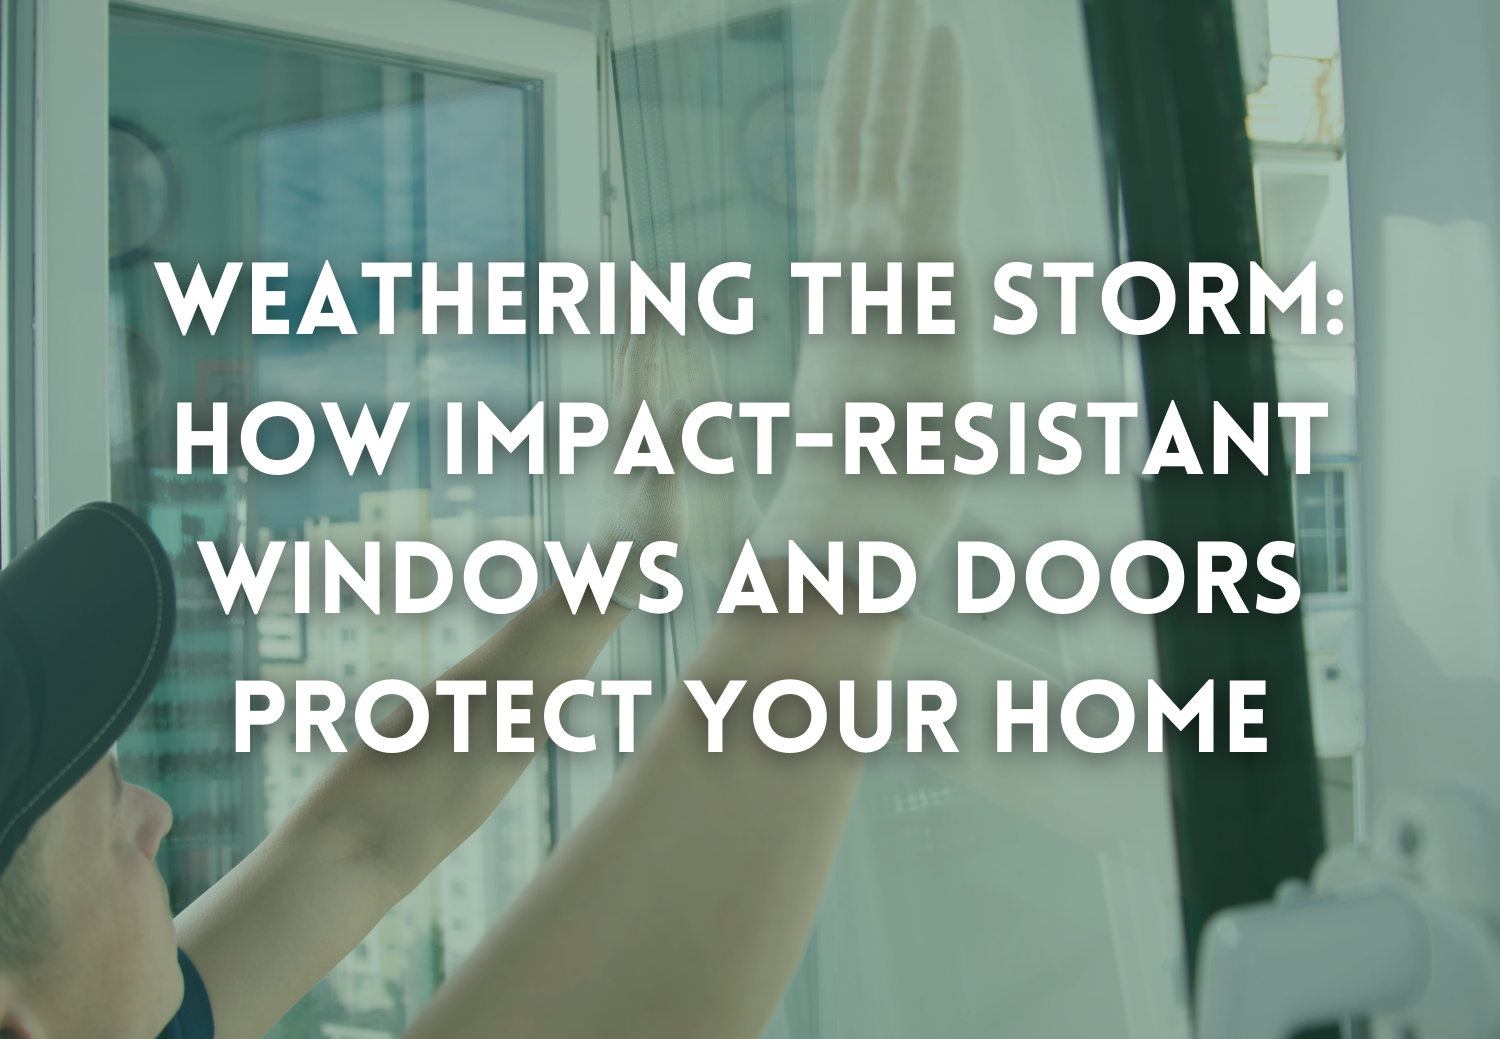 Weathering the Storm: How Impact-Resistant Windows and Doors Protect Your Home